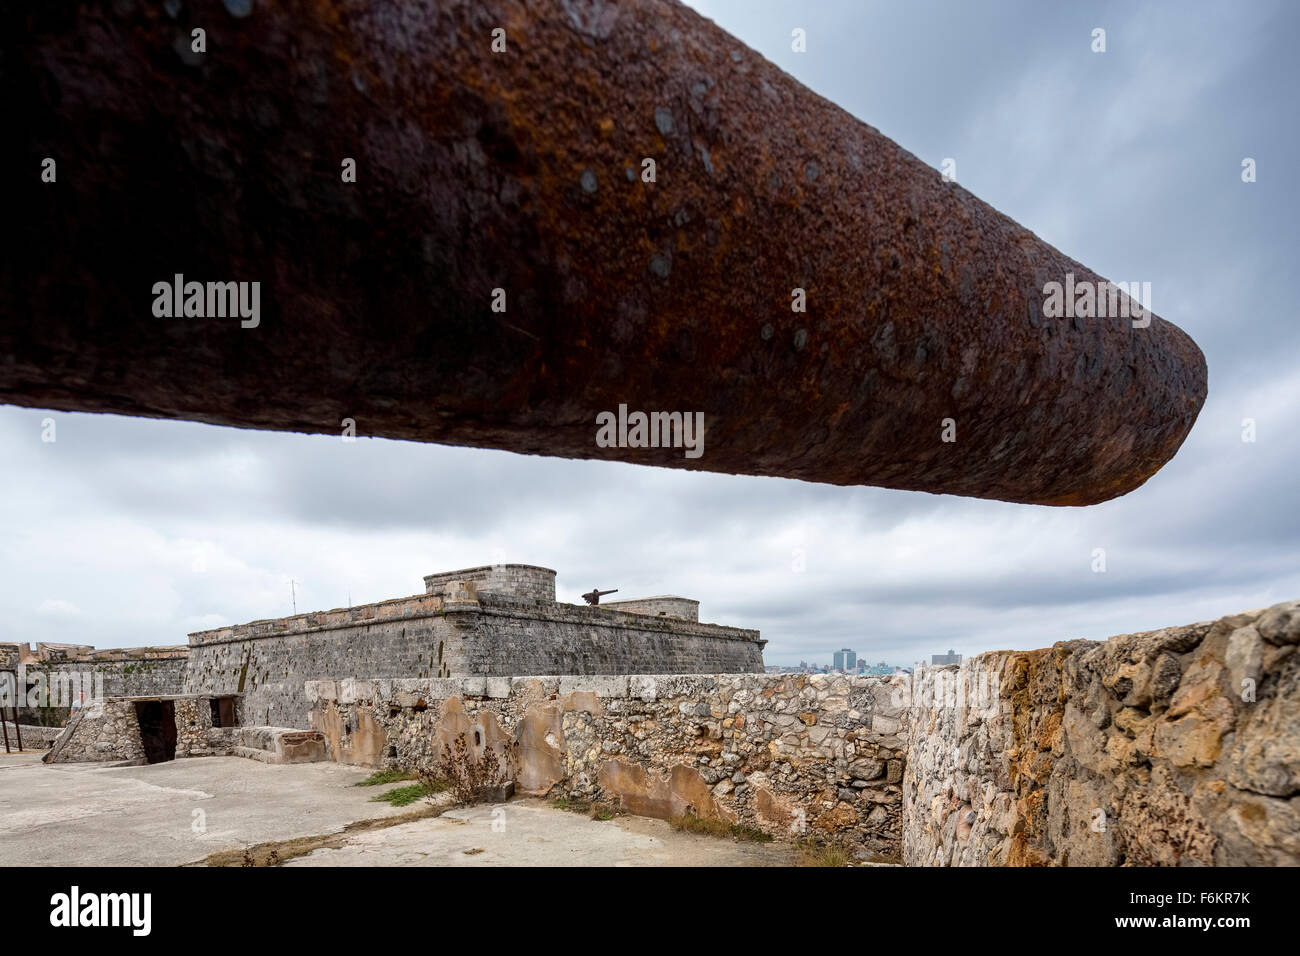 View from the Old Fort Haban Fuerte del Morro under an old cannon in Old Havana, Street Scene, La Habana, Cuba, Caribbean, North Stock Photo